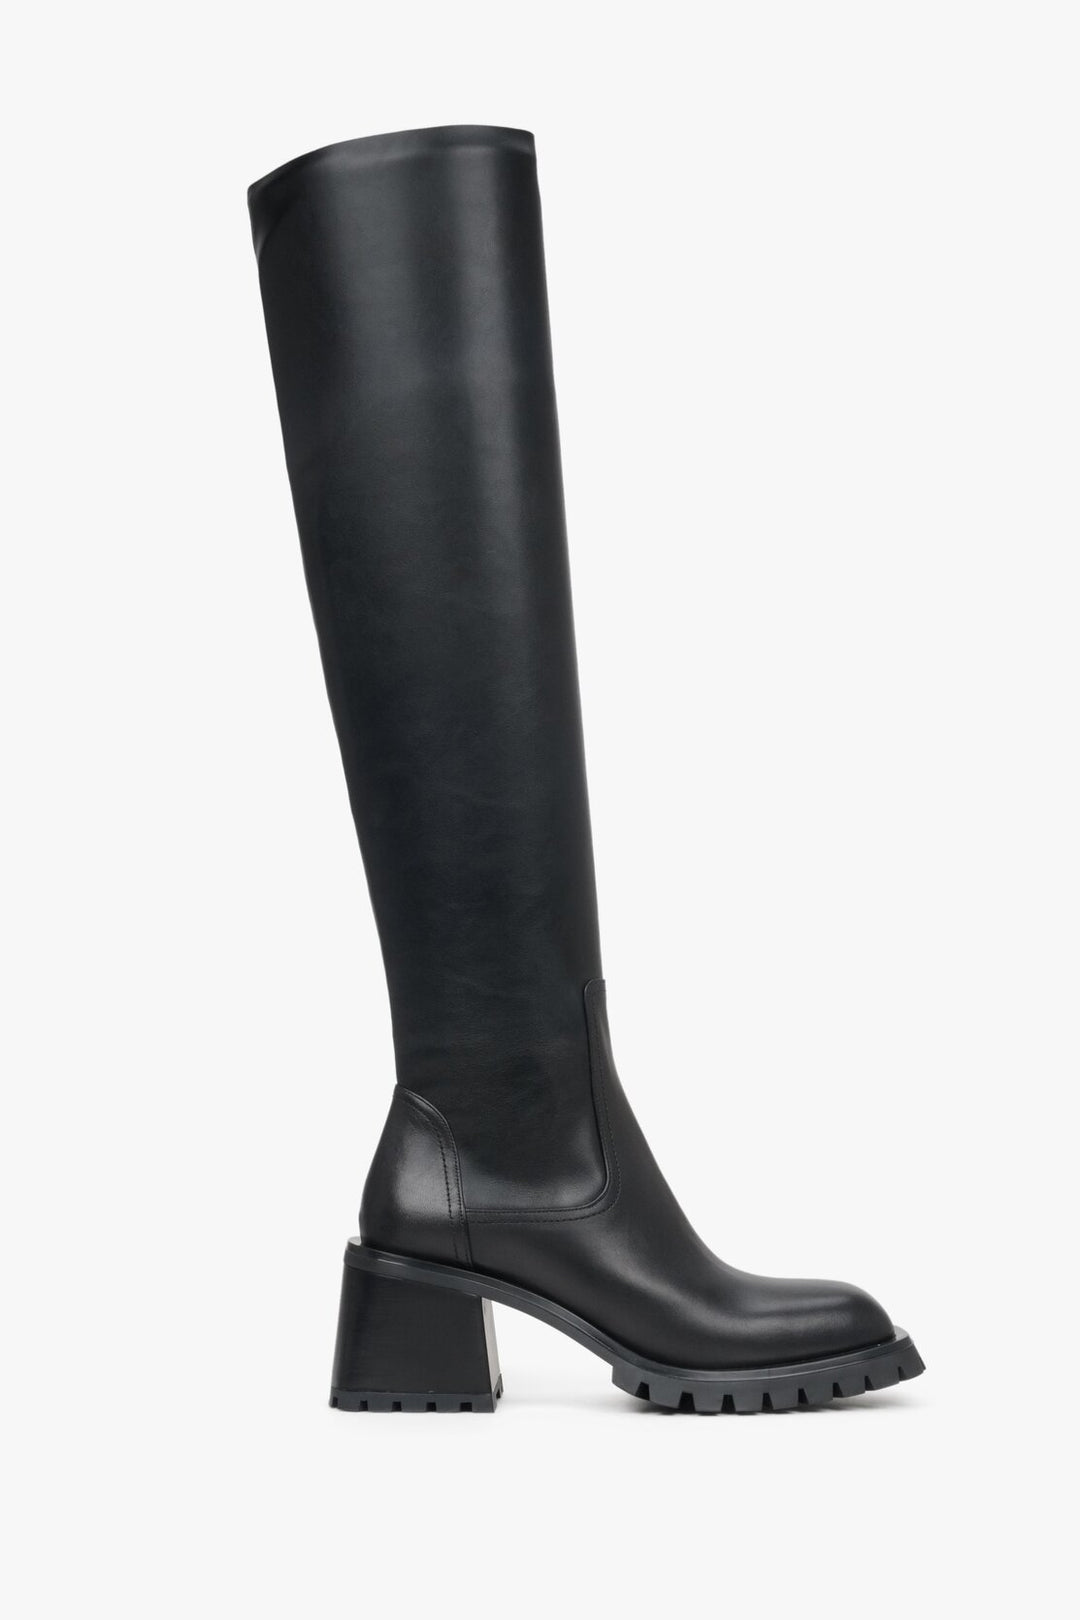 High, women's fall-spring boots made of genuine leather by Estro - black color.